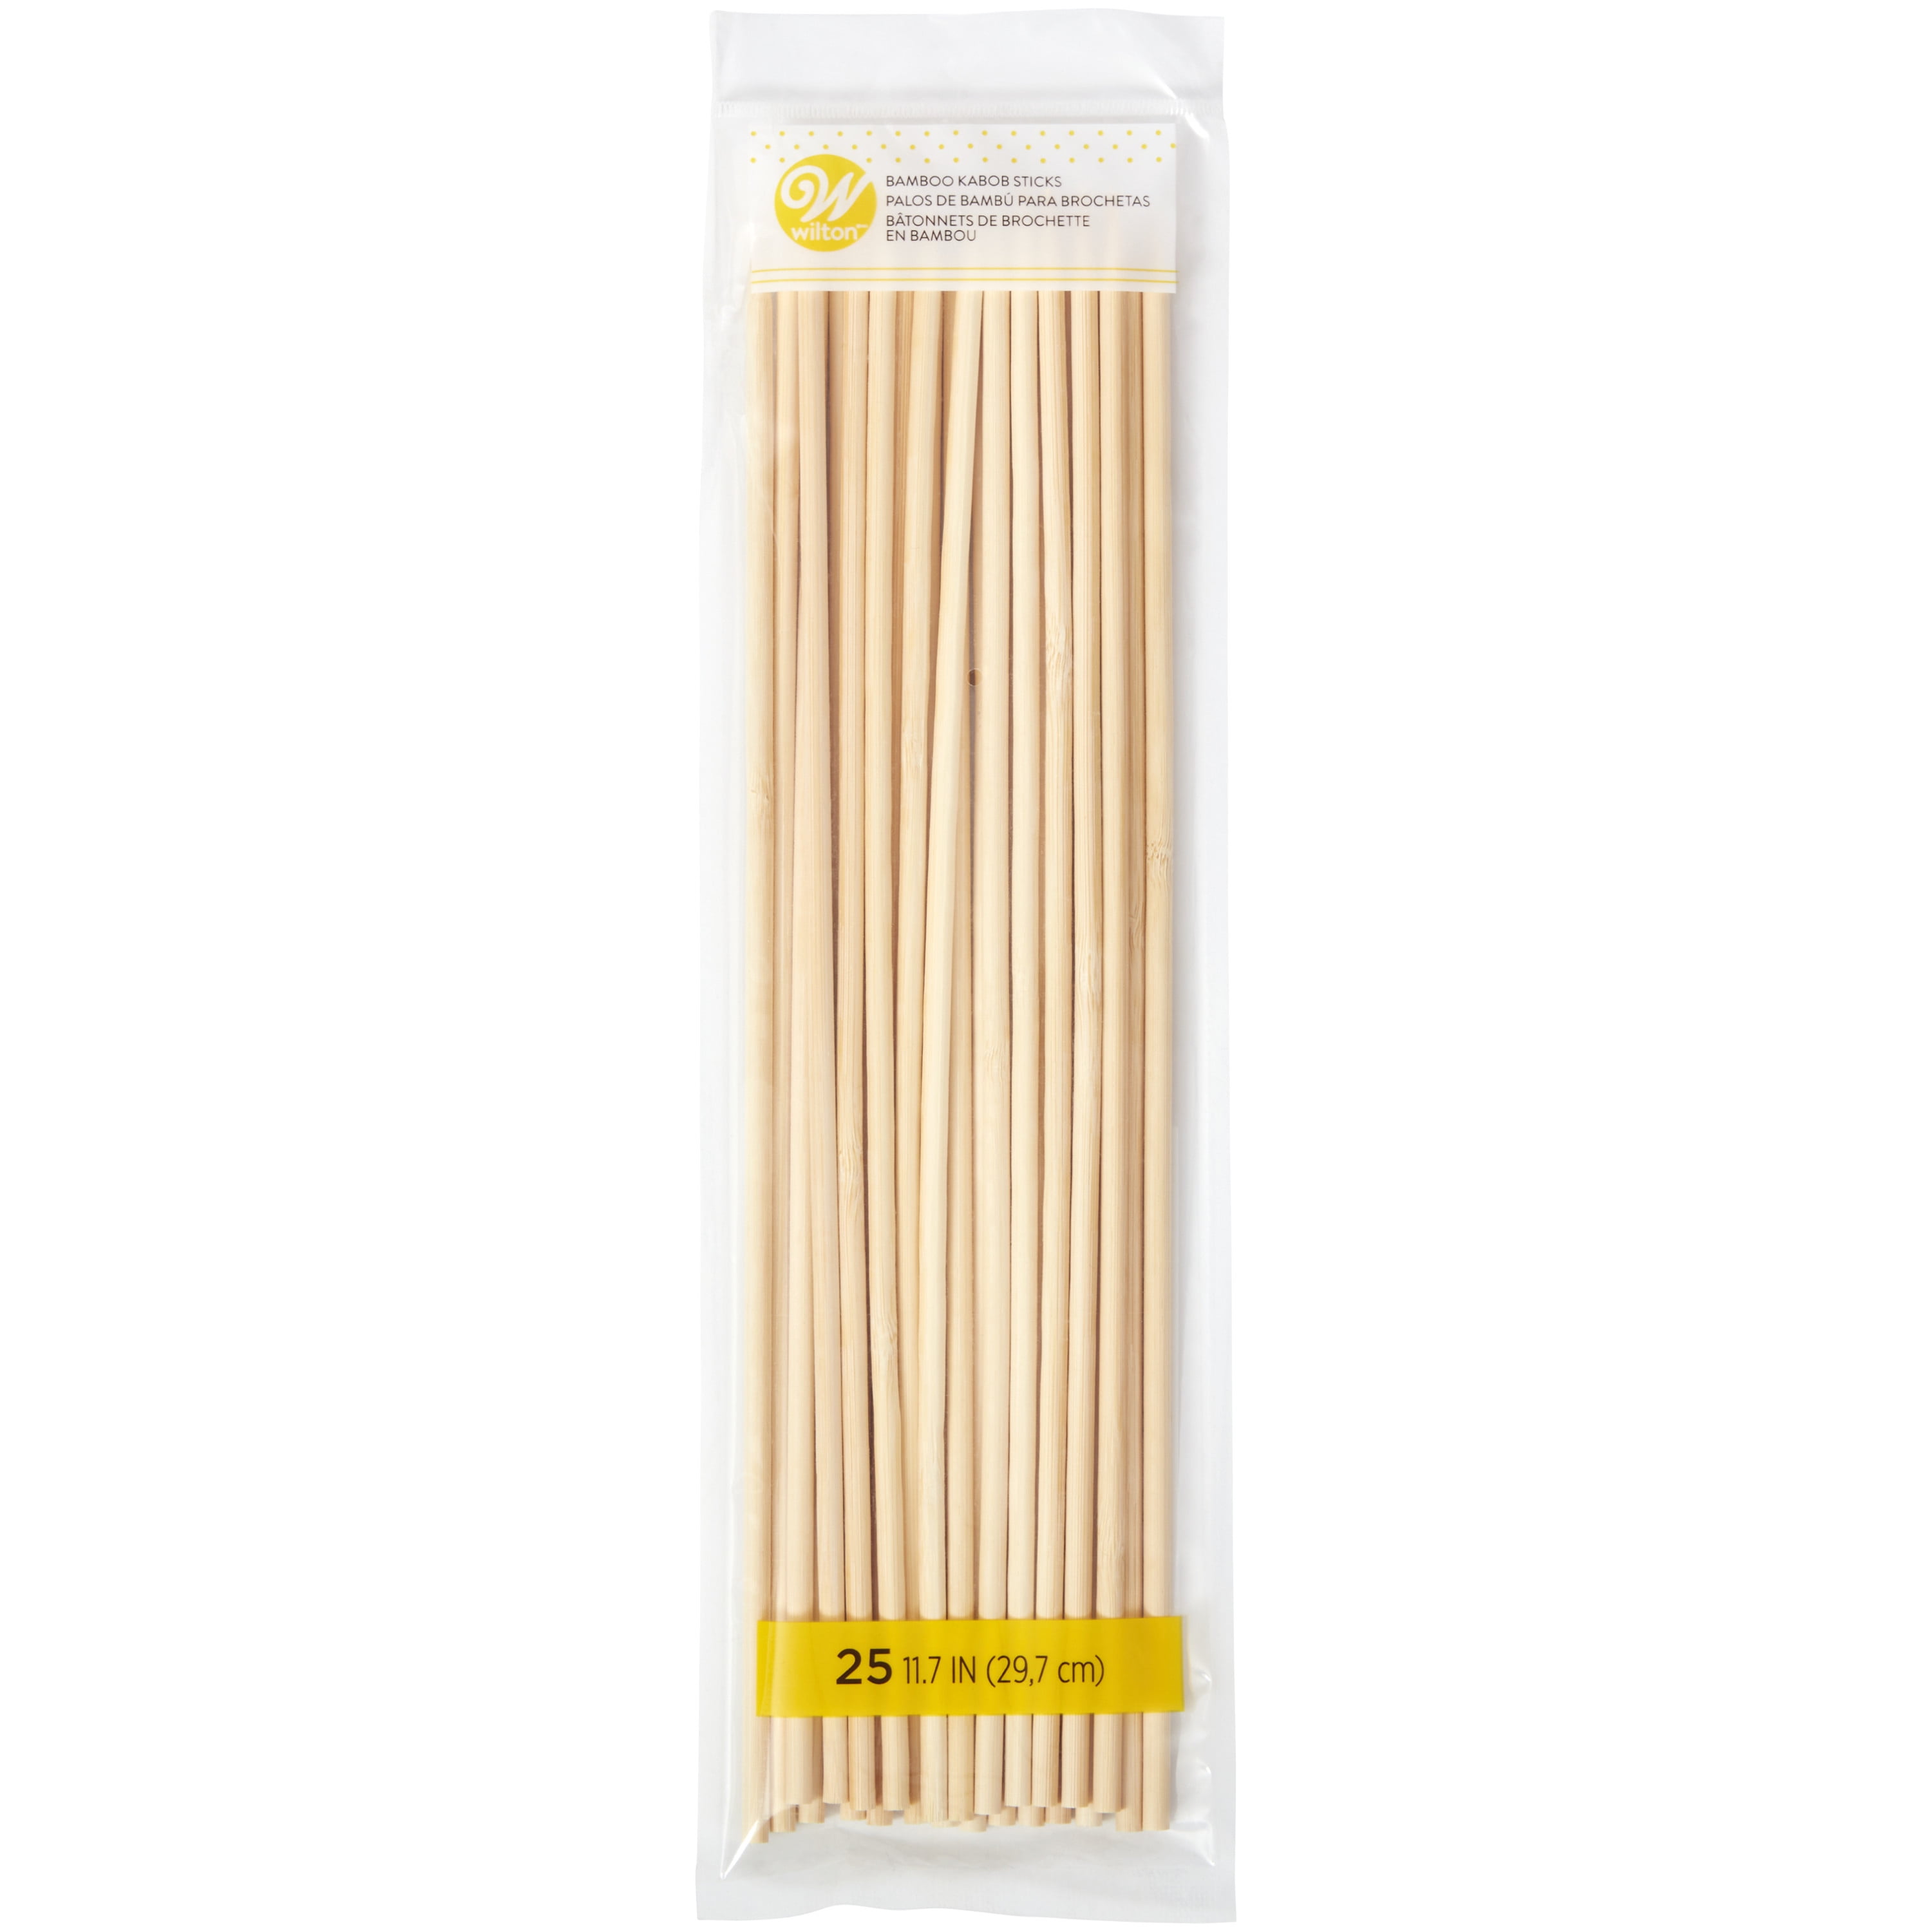 Extra Long 100 x 40cm Wooden Bamboo Skewers Sticks Kebab, BBQ Strong 